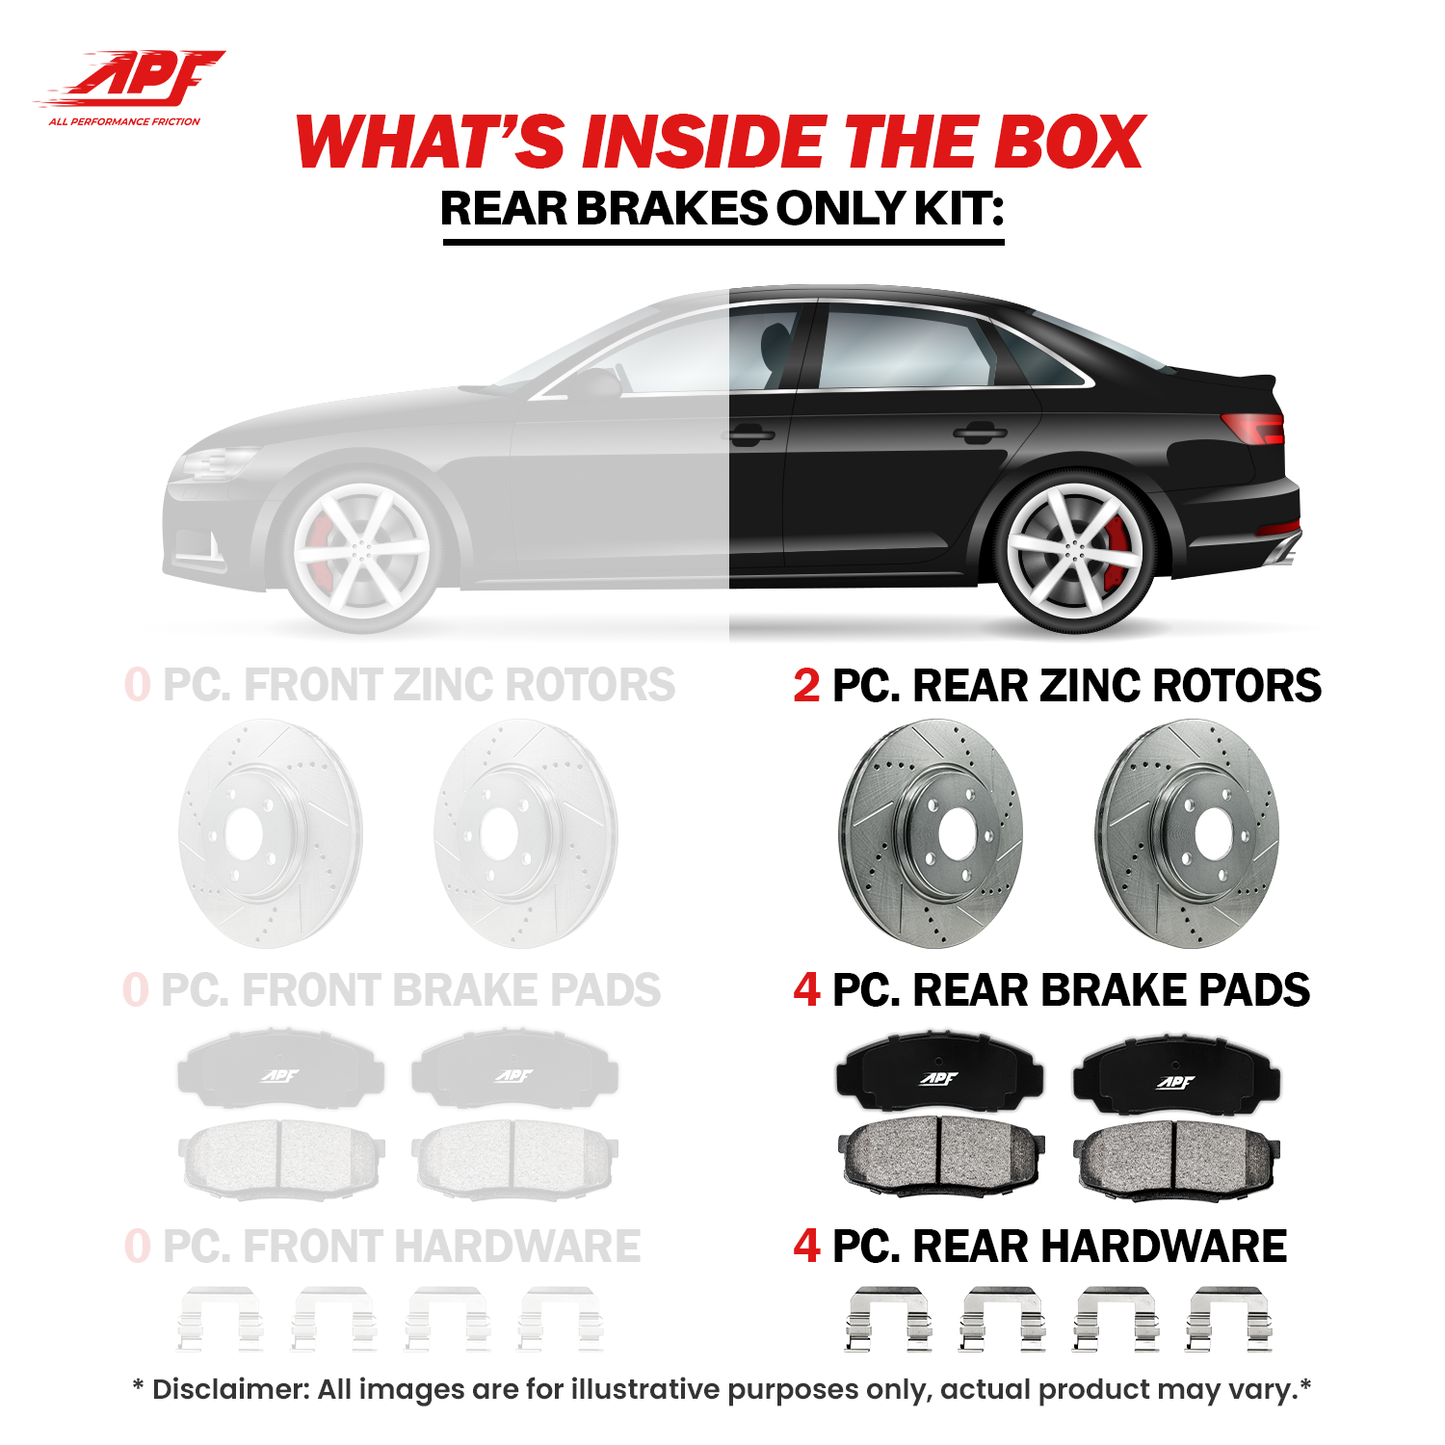 APF All Performance Friction Rear Rotors and Pads Half Kit compatible with Lexus ES330 2004-2006 Zinc Drilled Slotted Rotors with Ceramic Carbon Fiber Brake Pads | $107.92